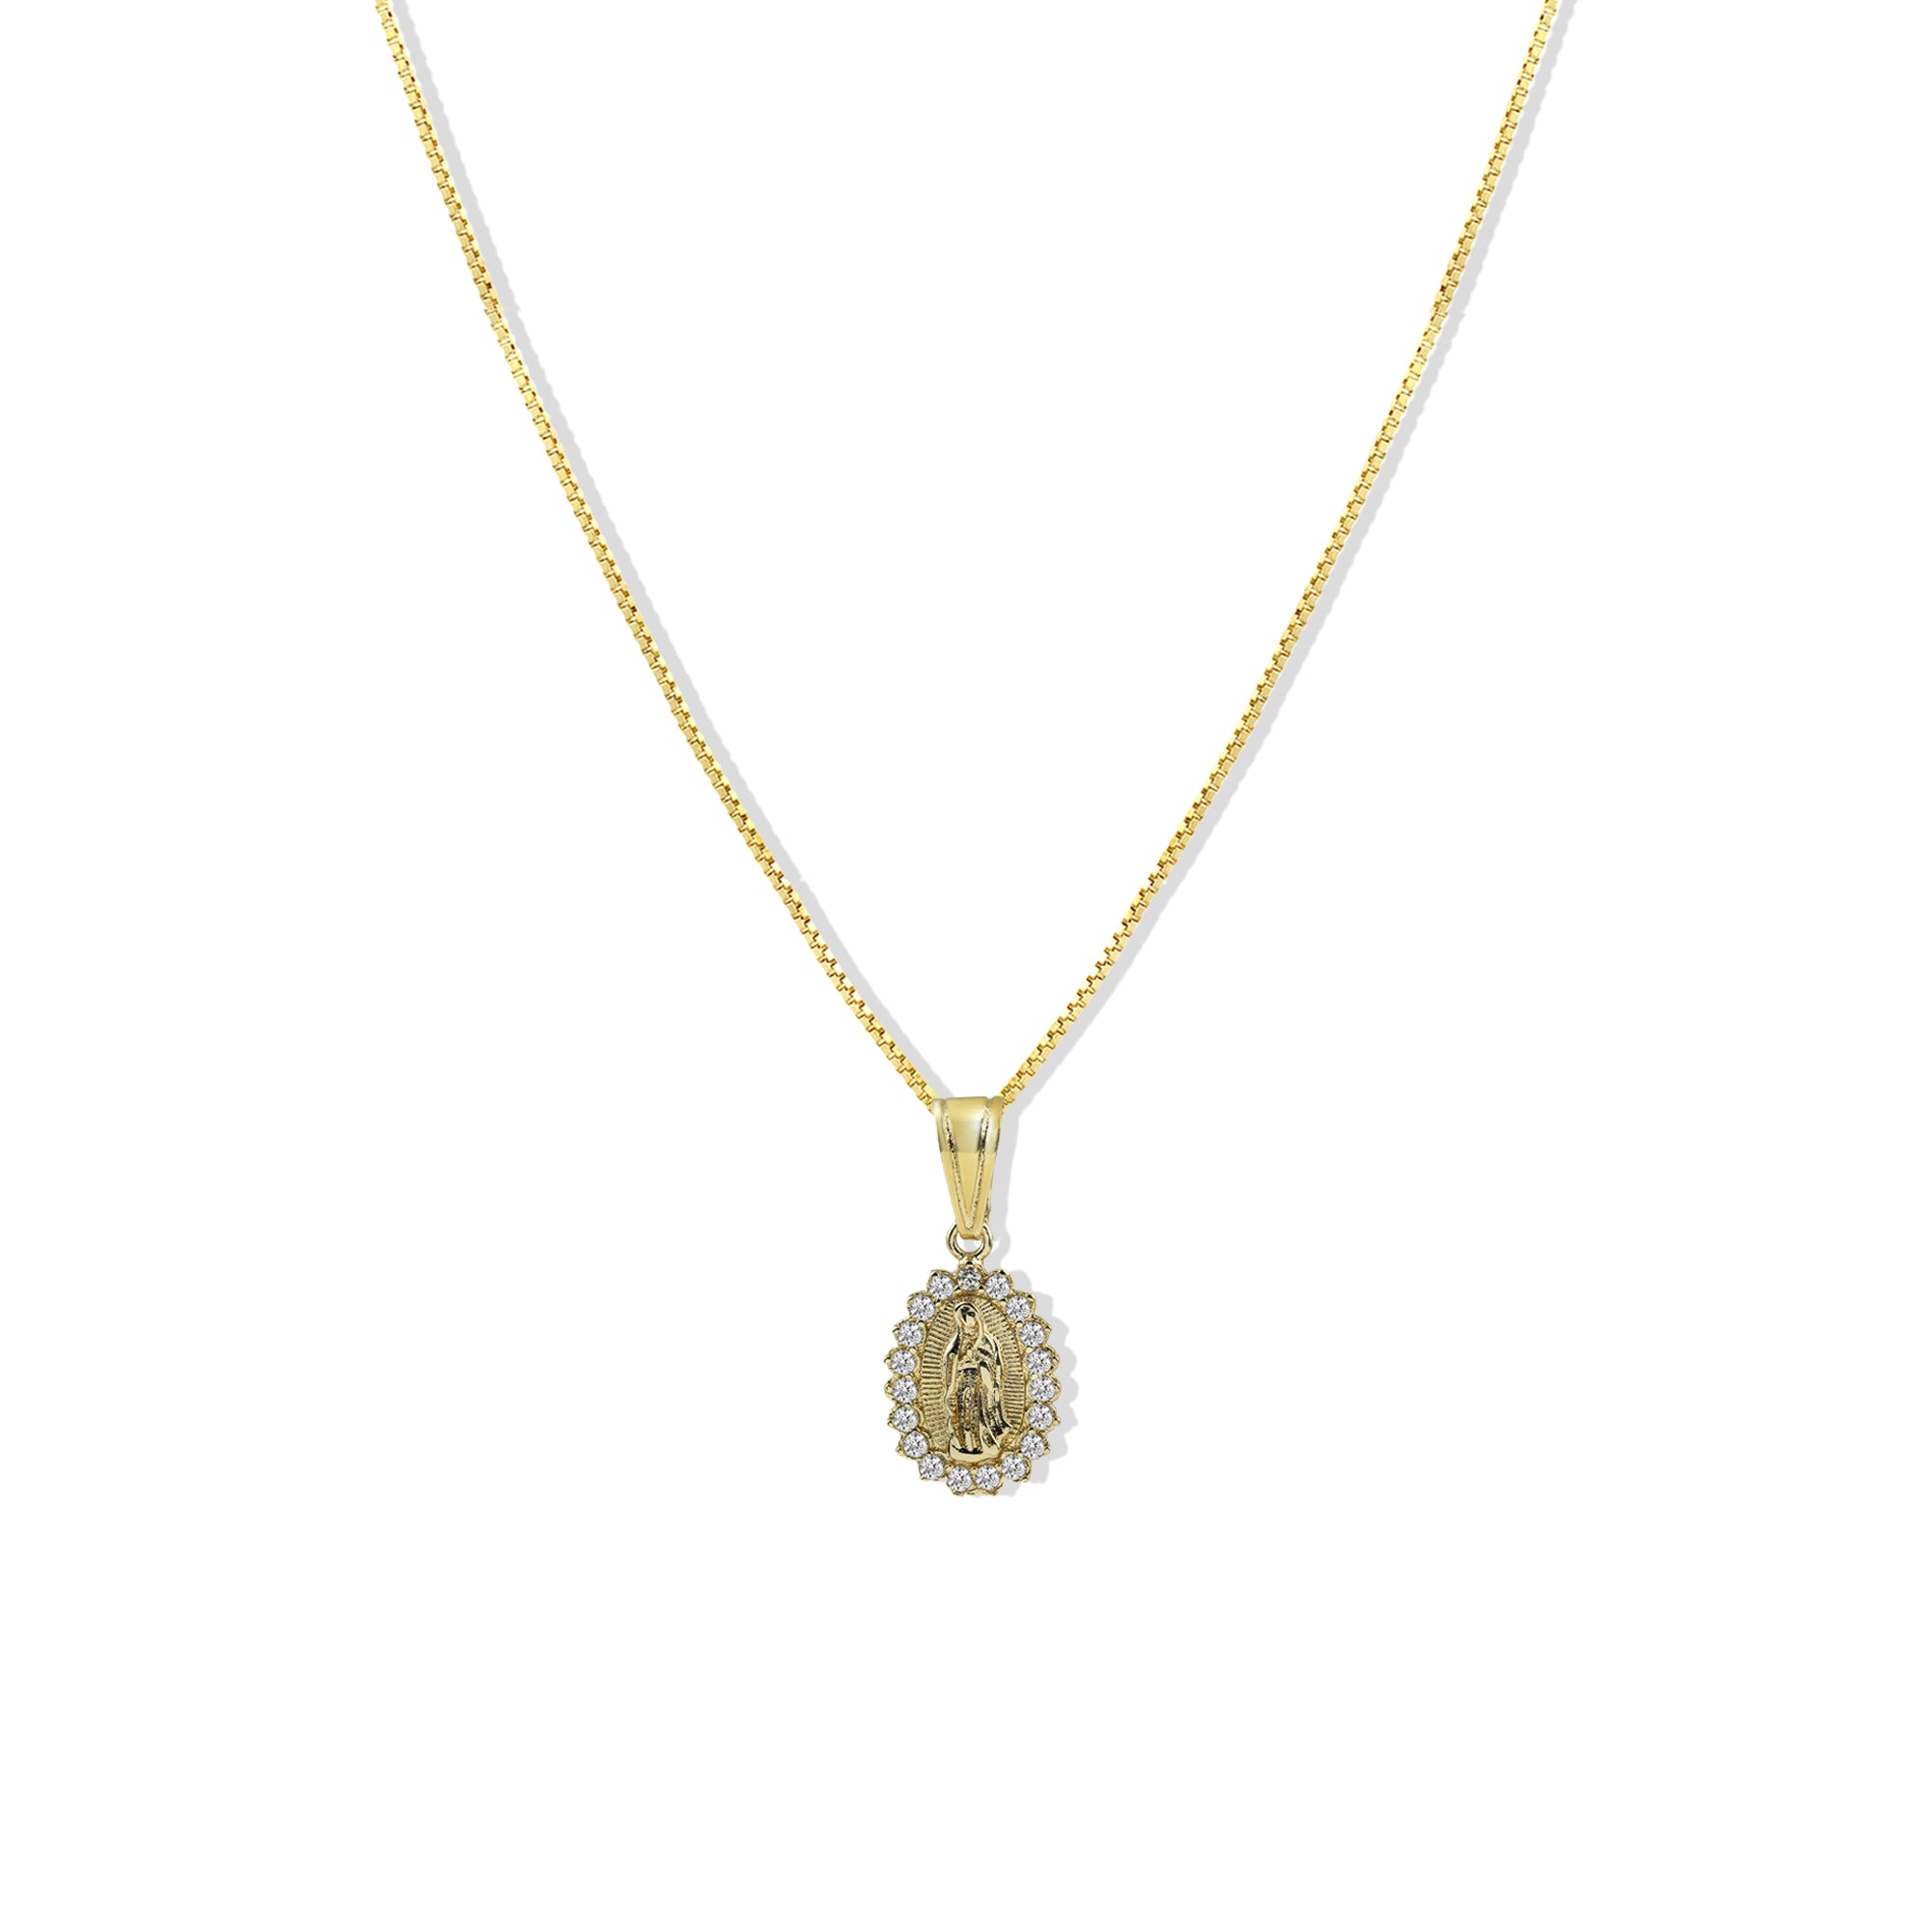 THE CZ GUADALUPE NECKLACE